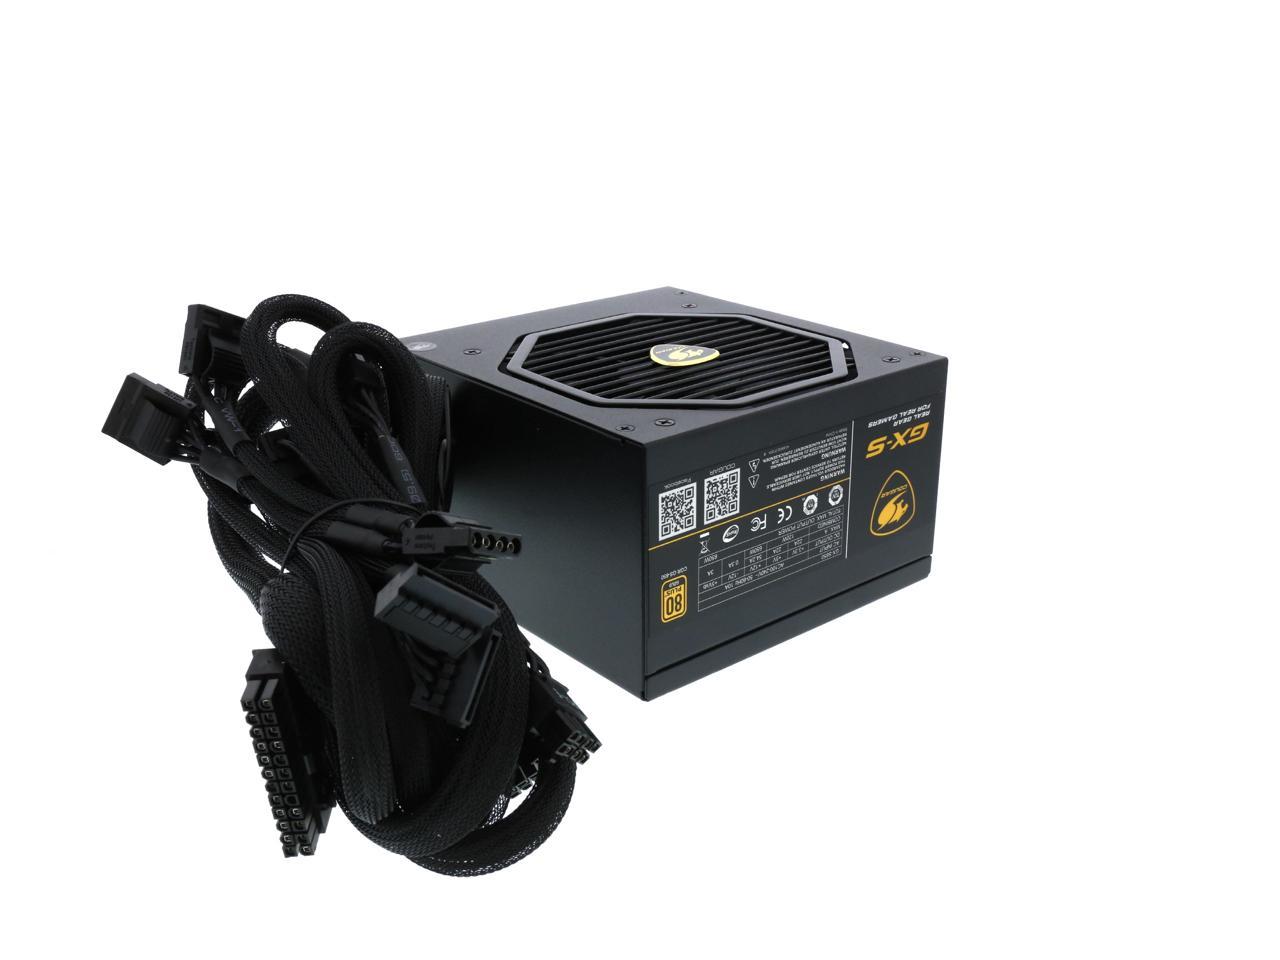 Certified Active PFC Power Supply Cougar MX-Series MX650 650W PSU ATX12V 80 